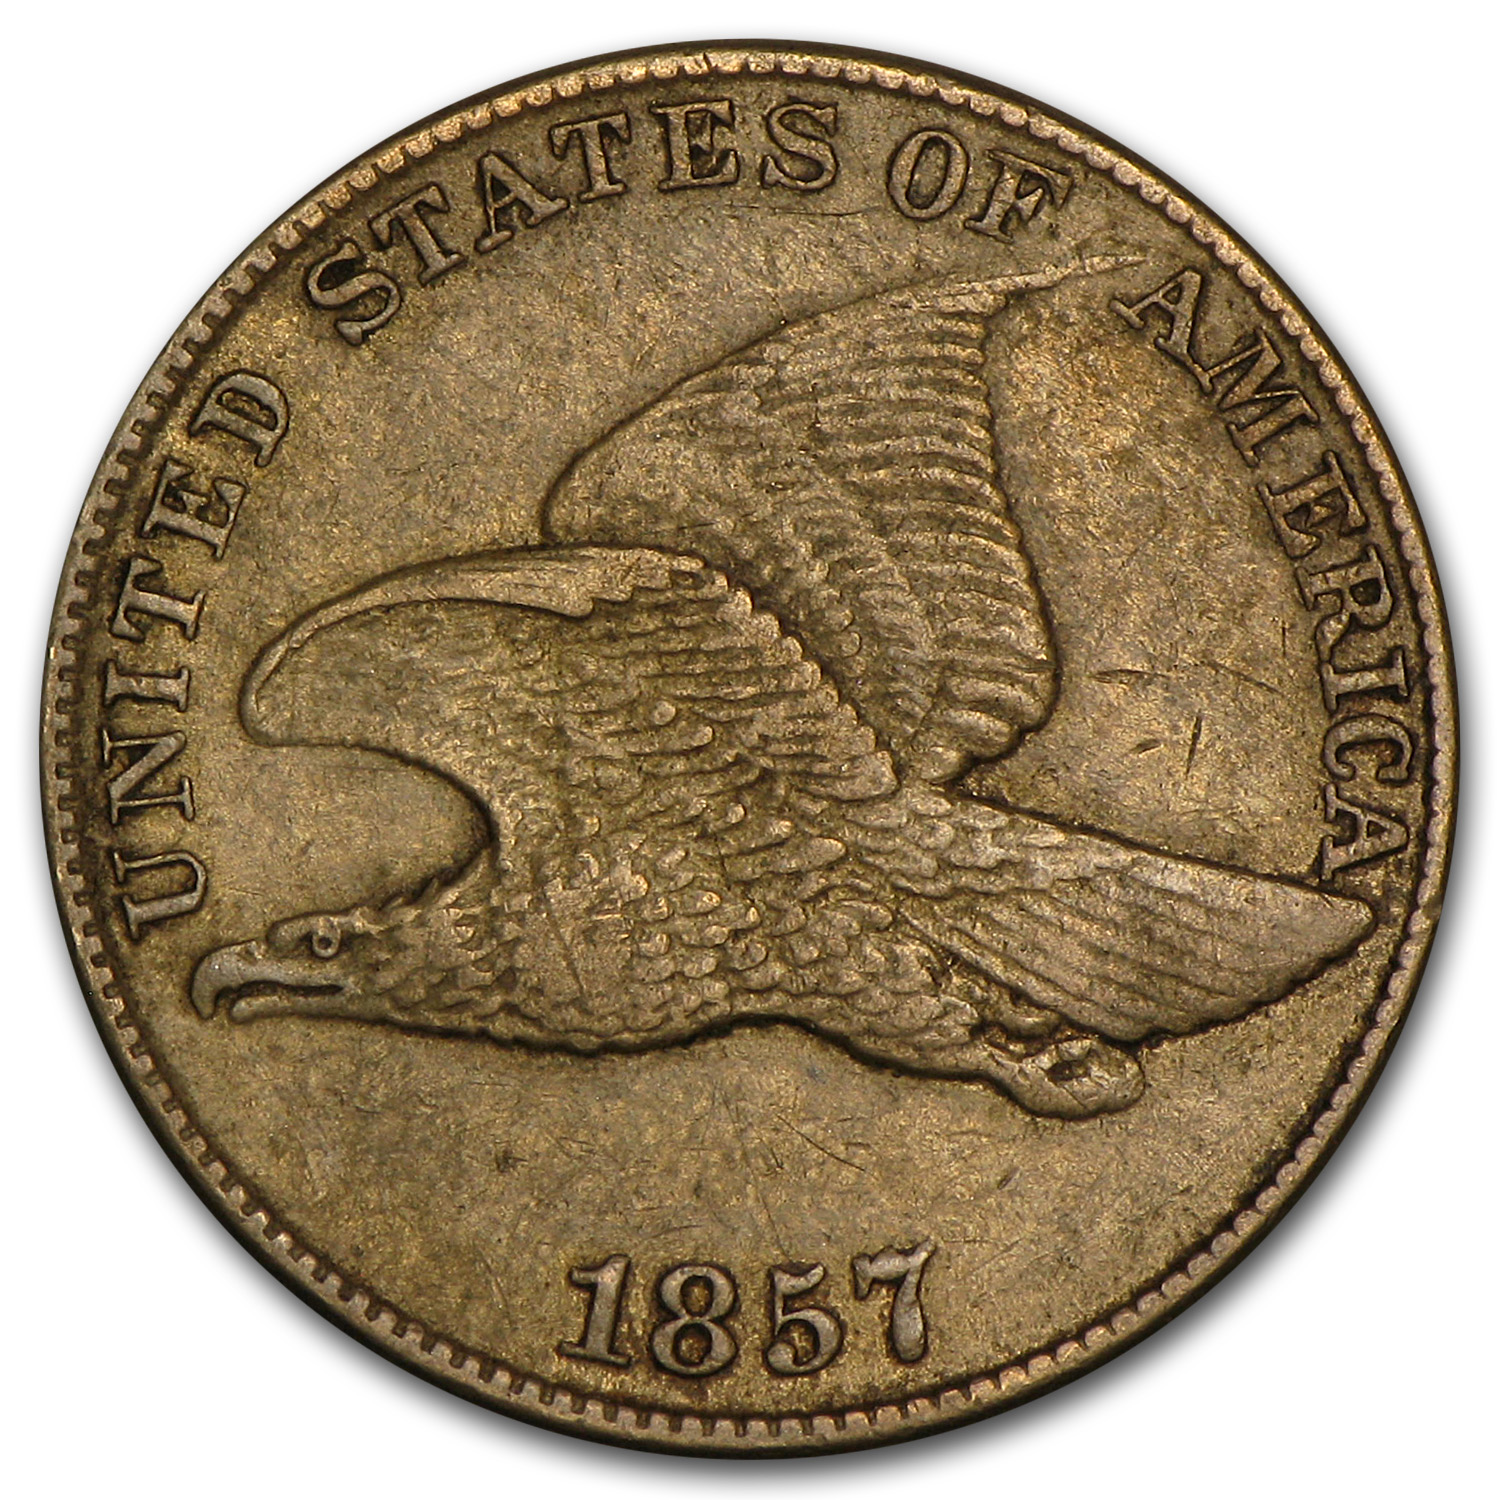 Buy 1857-1858 Flying Eagle Cents XF